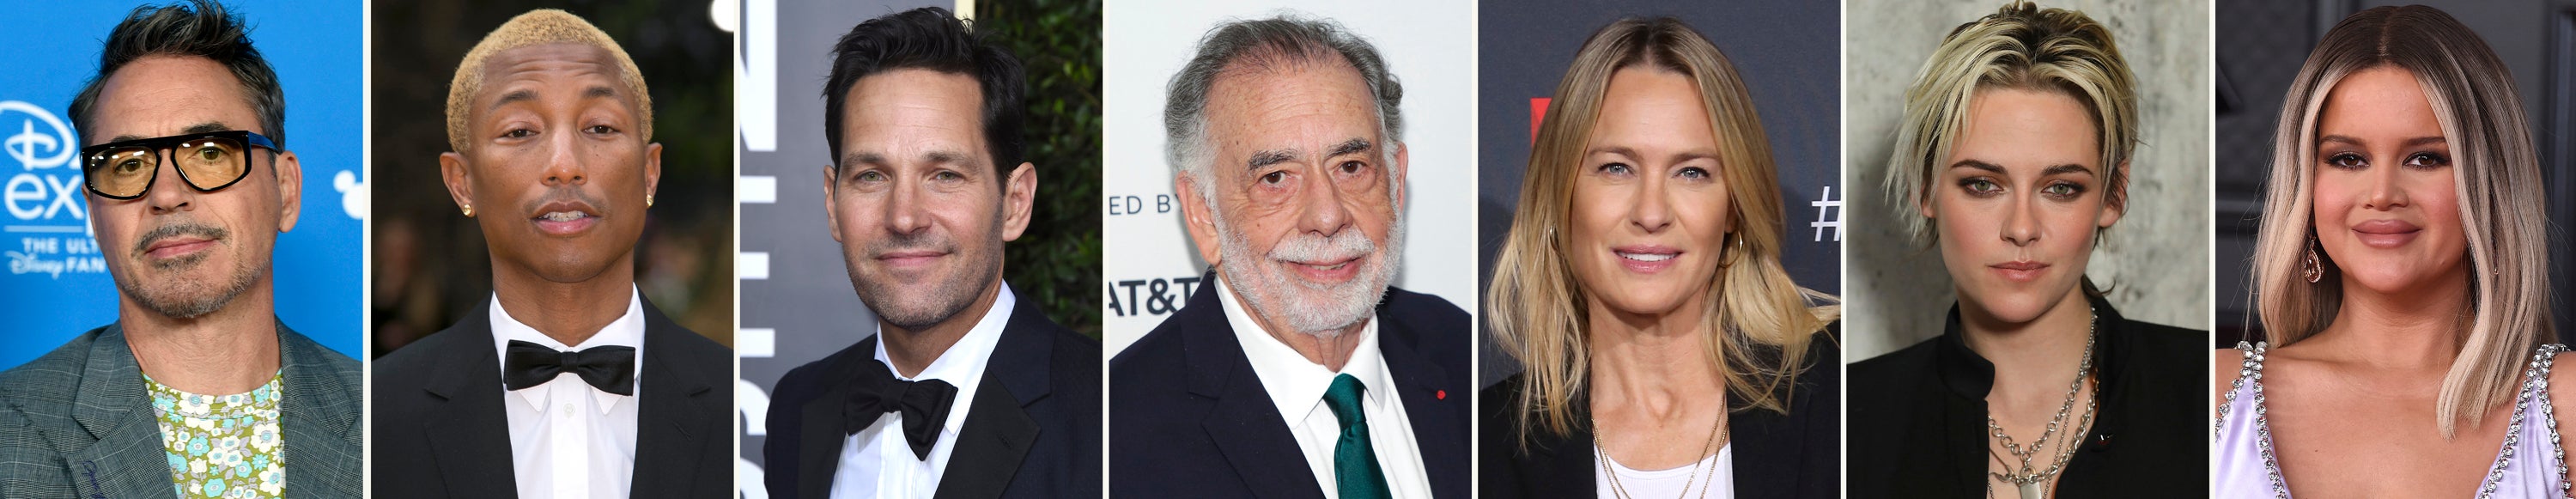 Celebrity Birthdays For The Week Of April 4 10 Roger Corman Allan Clarke Francis Ford Coppola 